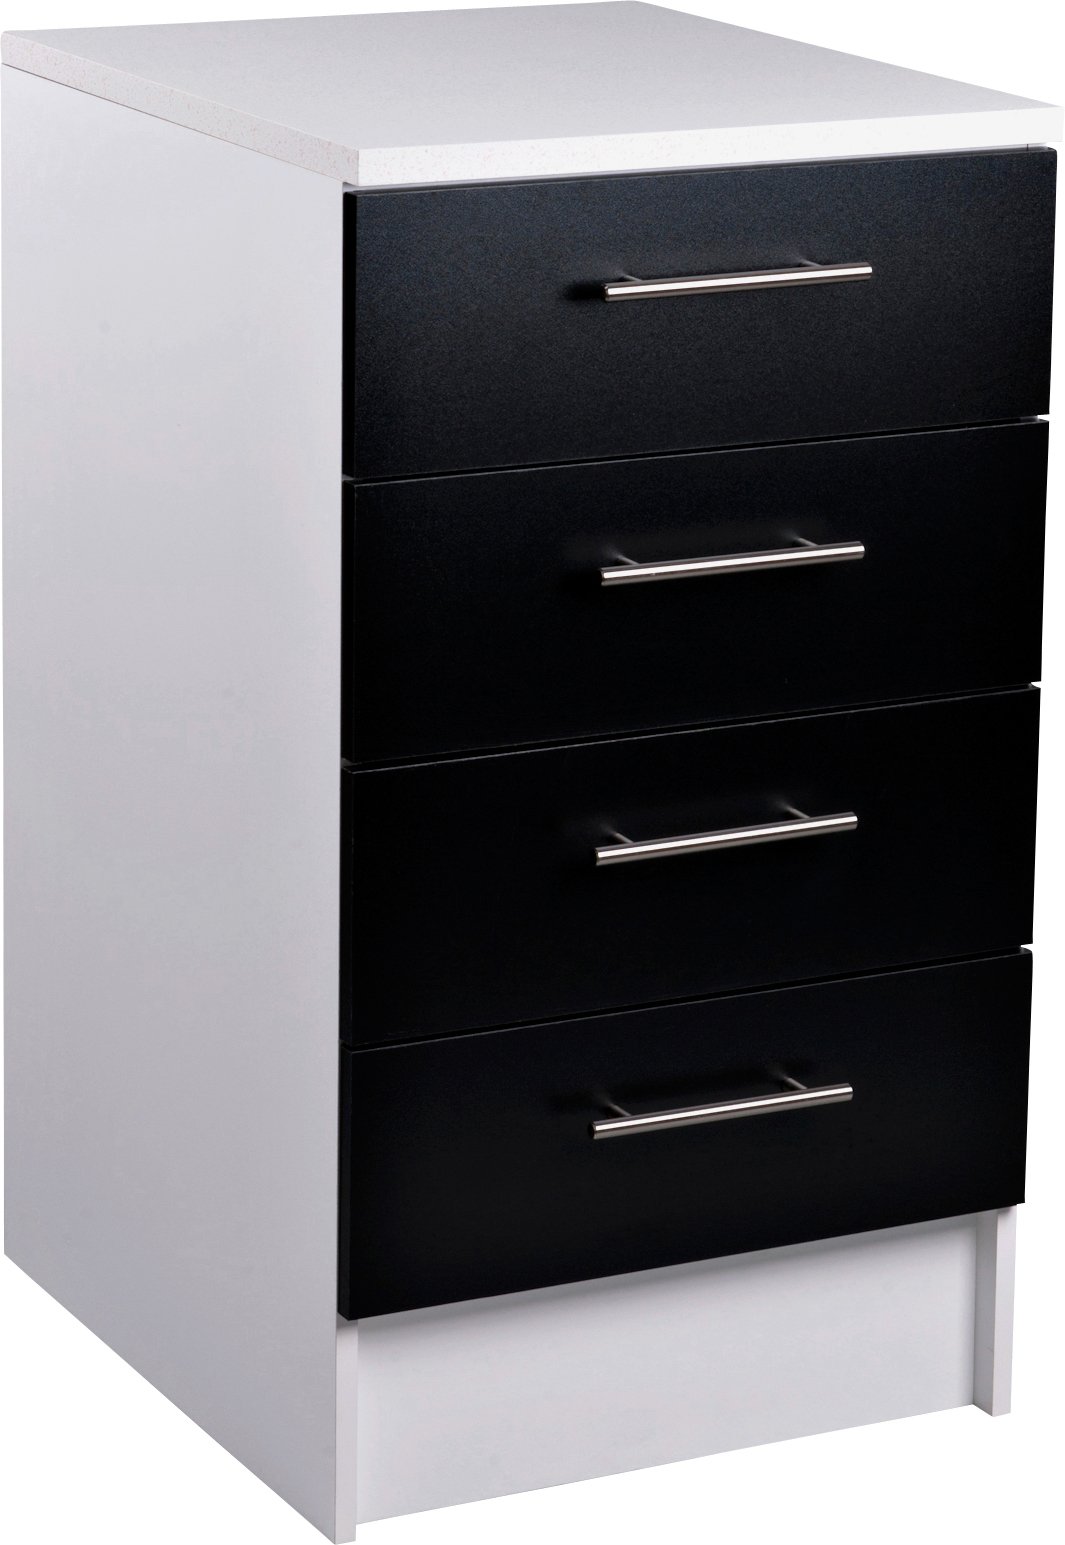 Argos Home Athina 500mm Fitted Kitchen Drawer Unit - Black